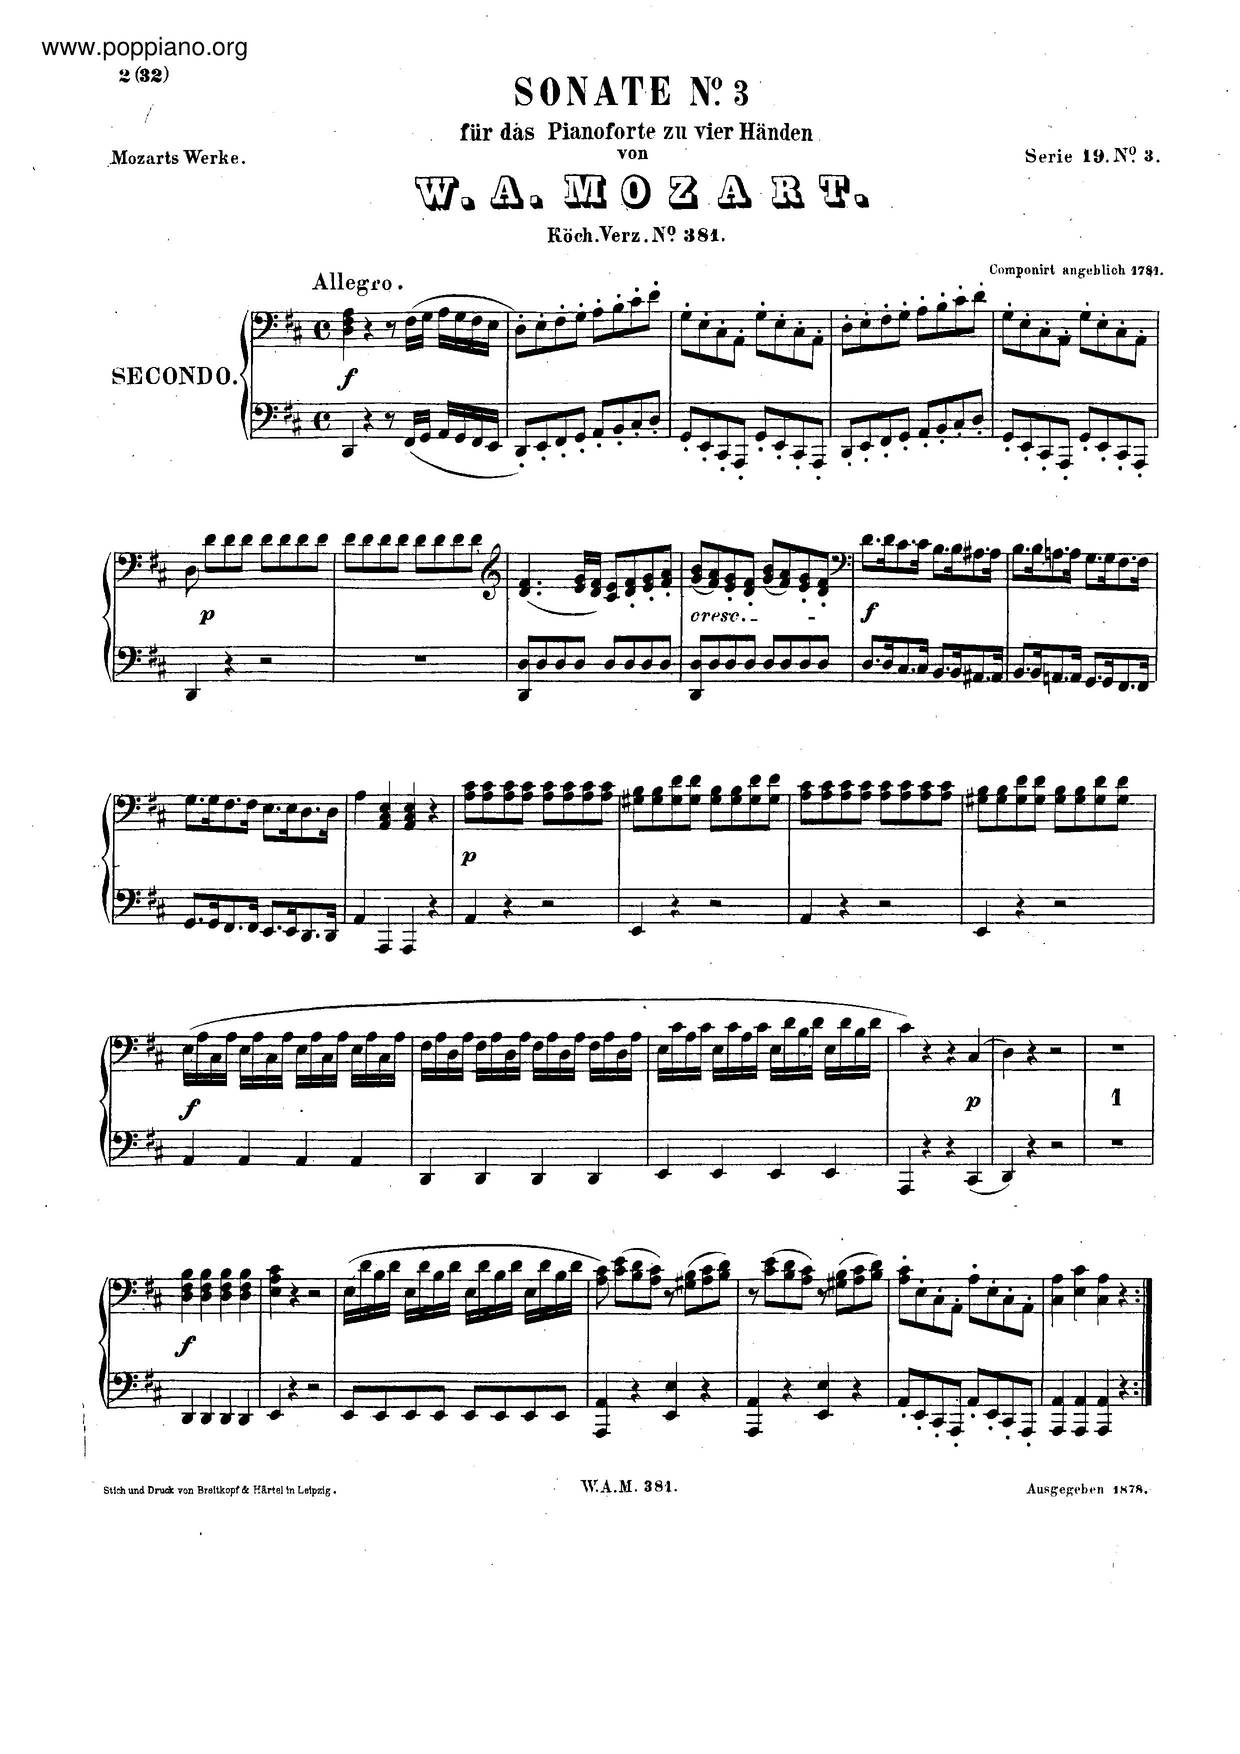 Sonata For Piano Four-Hands In D Major, K. 381/123A琴谱